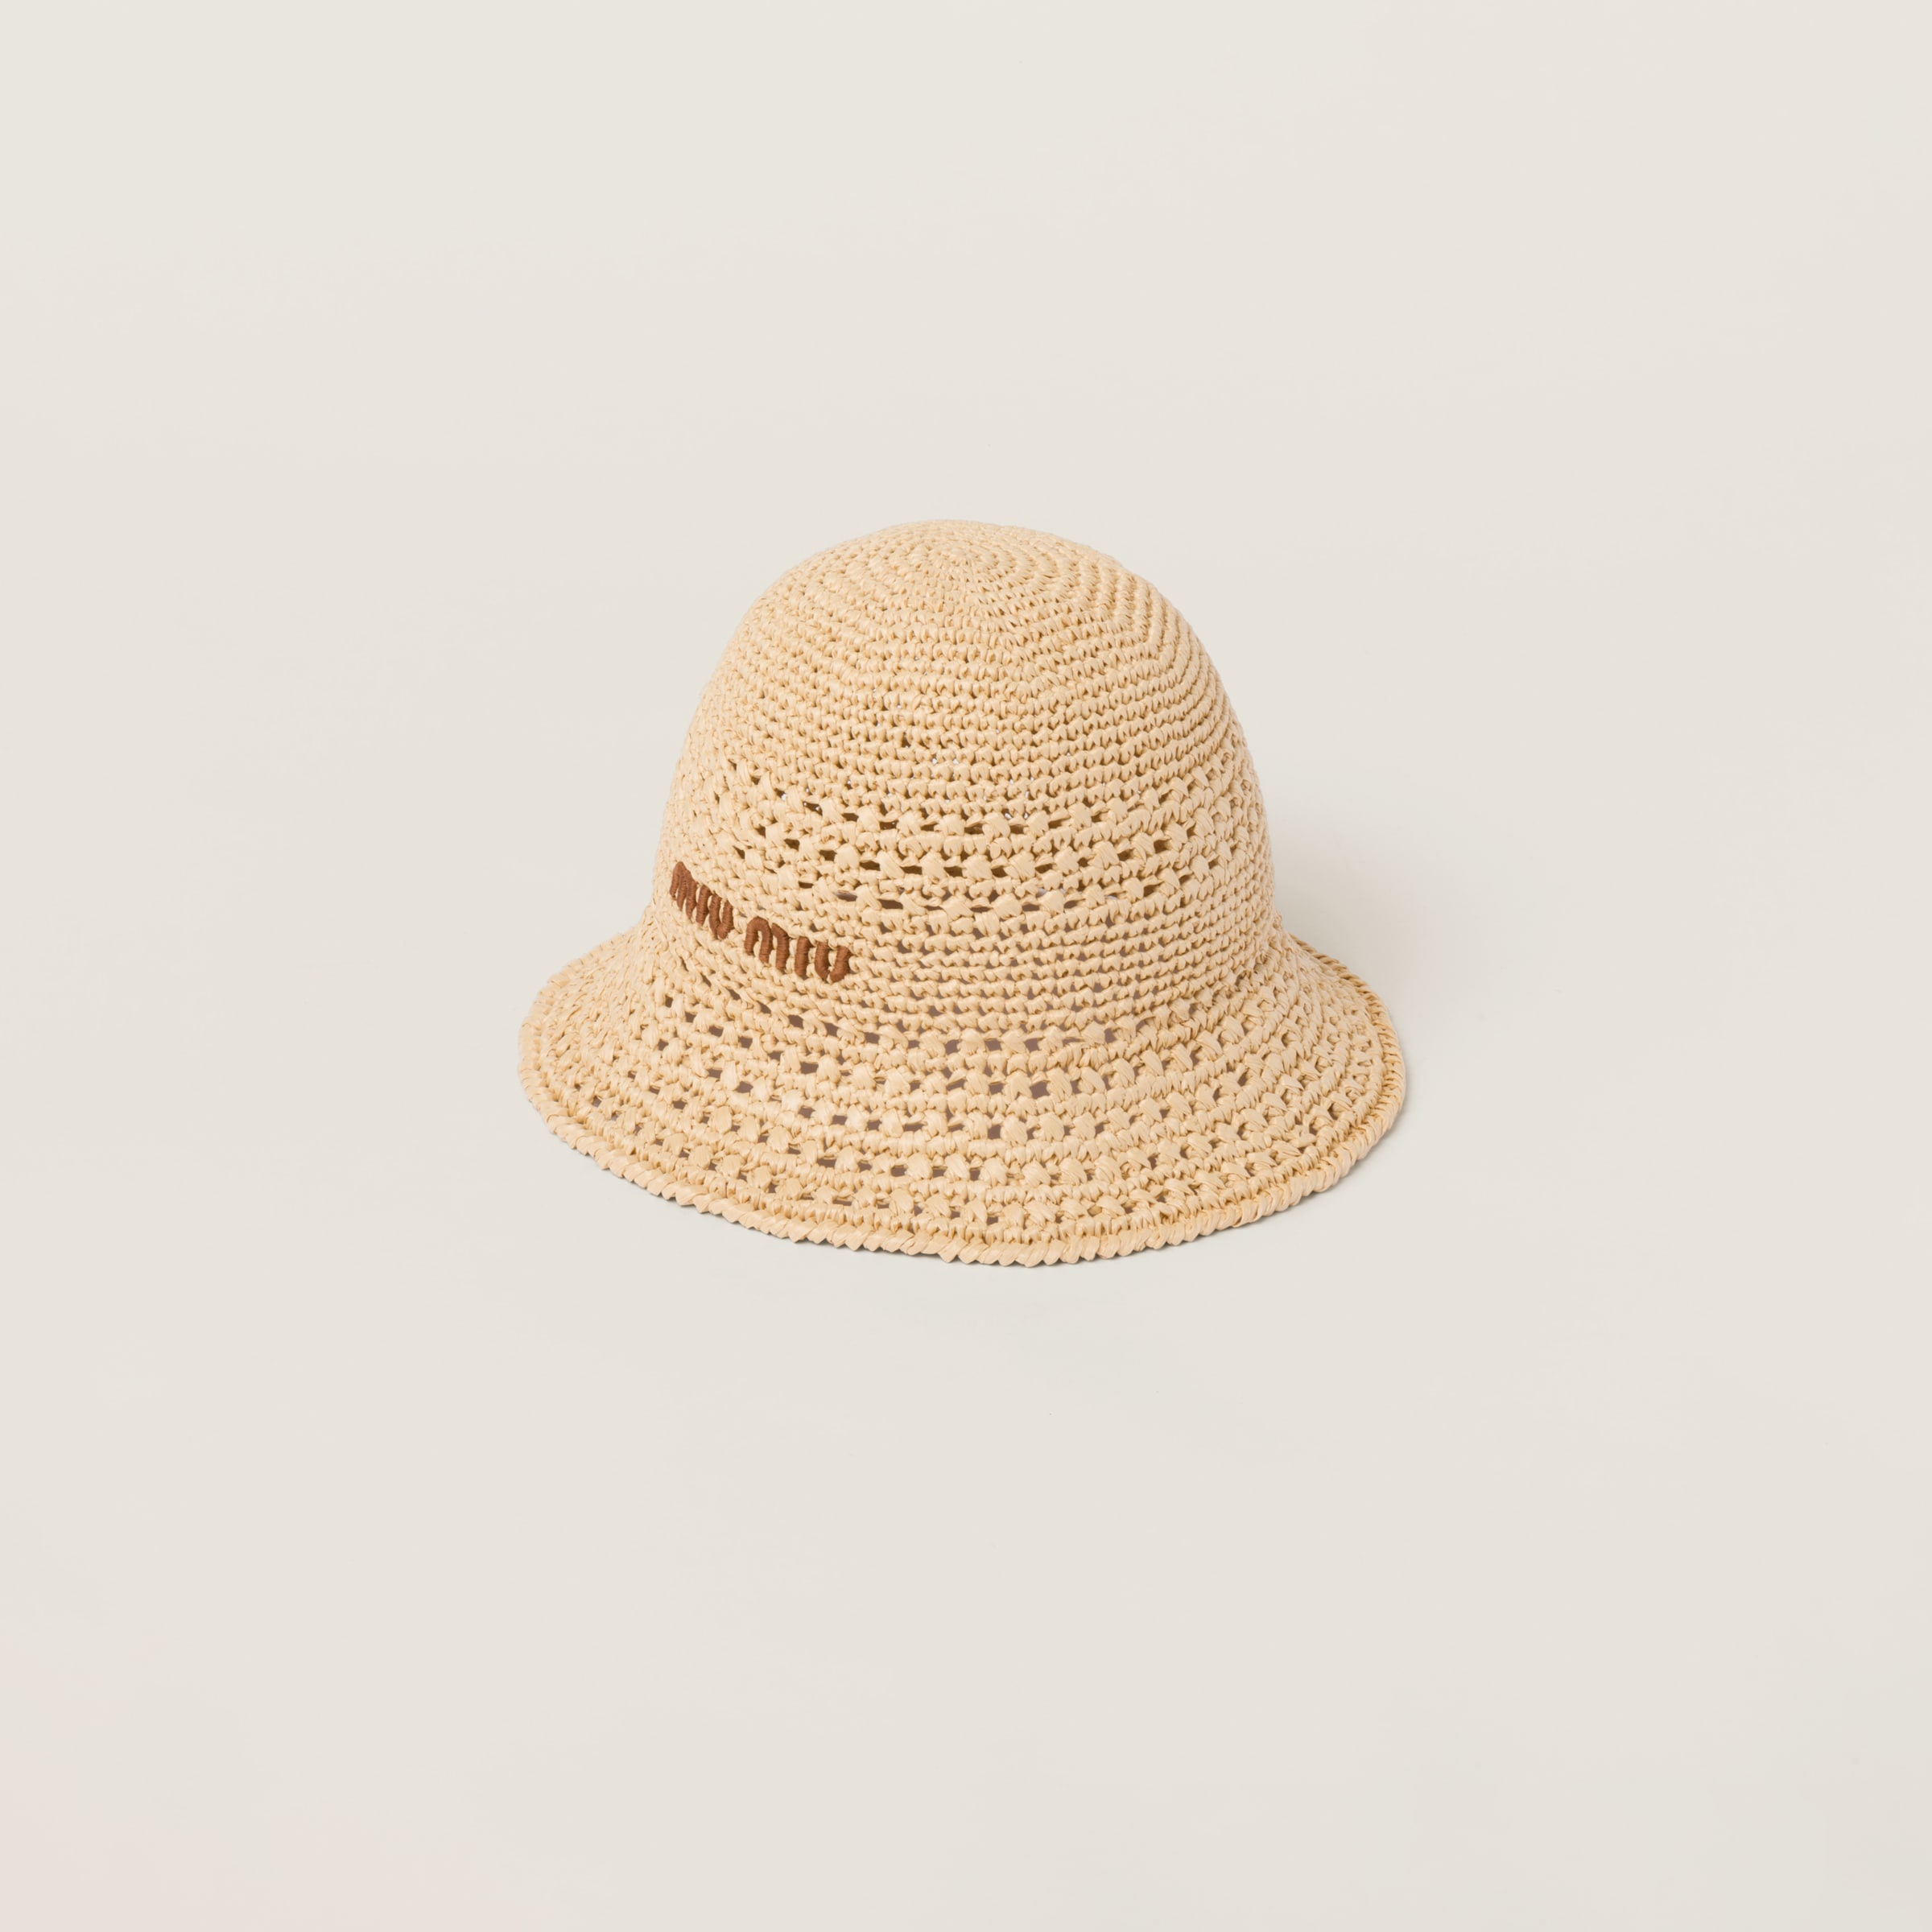 Woven fabric hat - 1